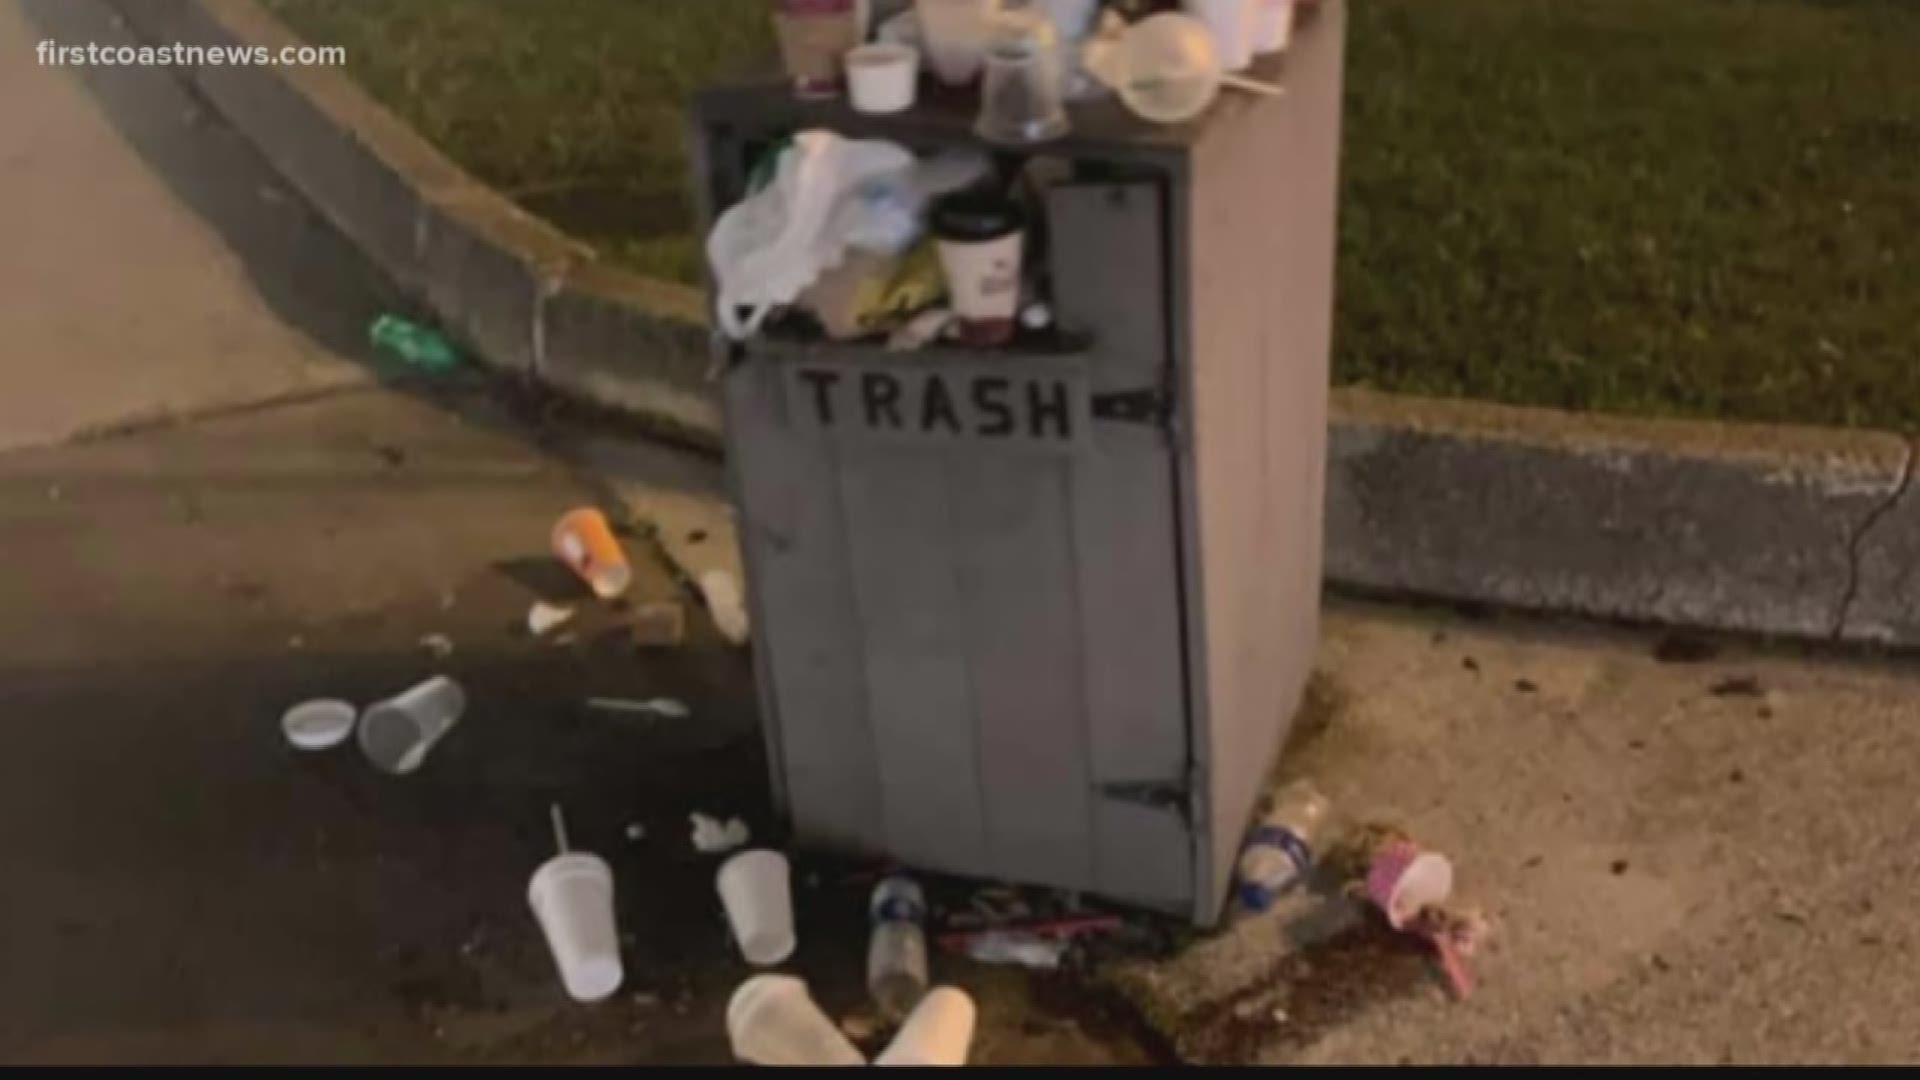 Trash is piling up around the city during one of the busiest times of the year.